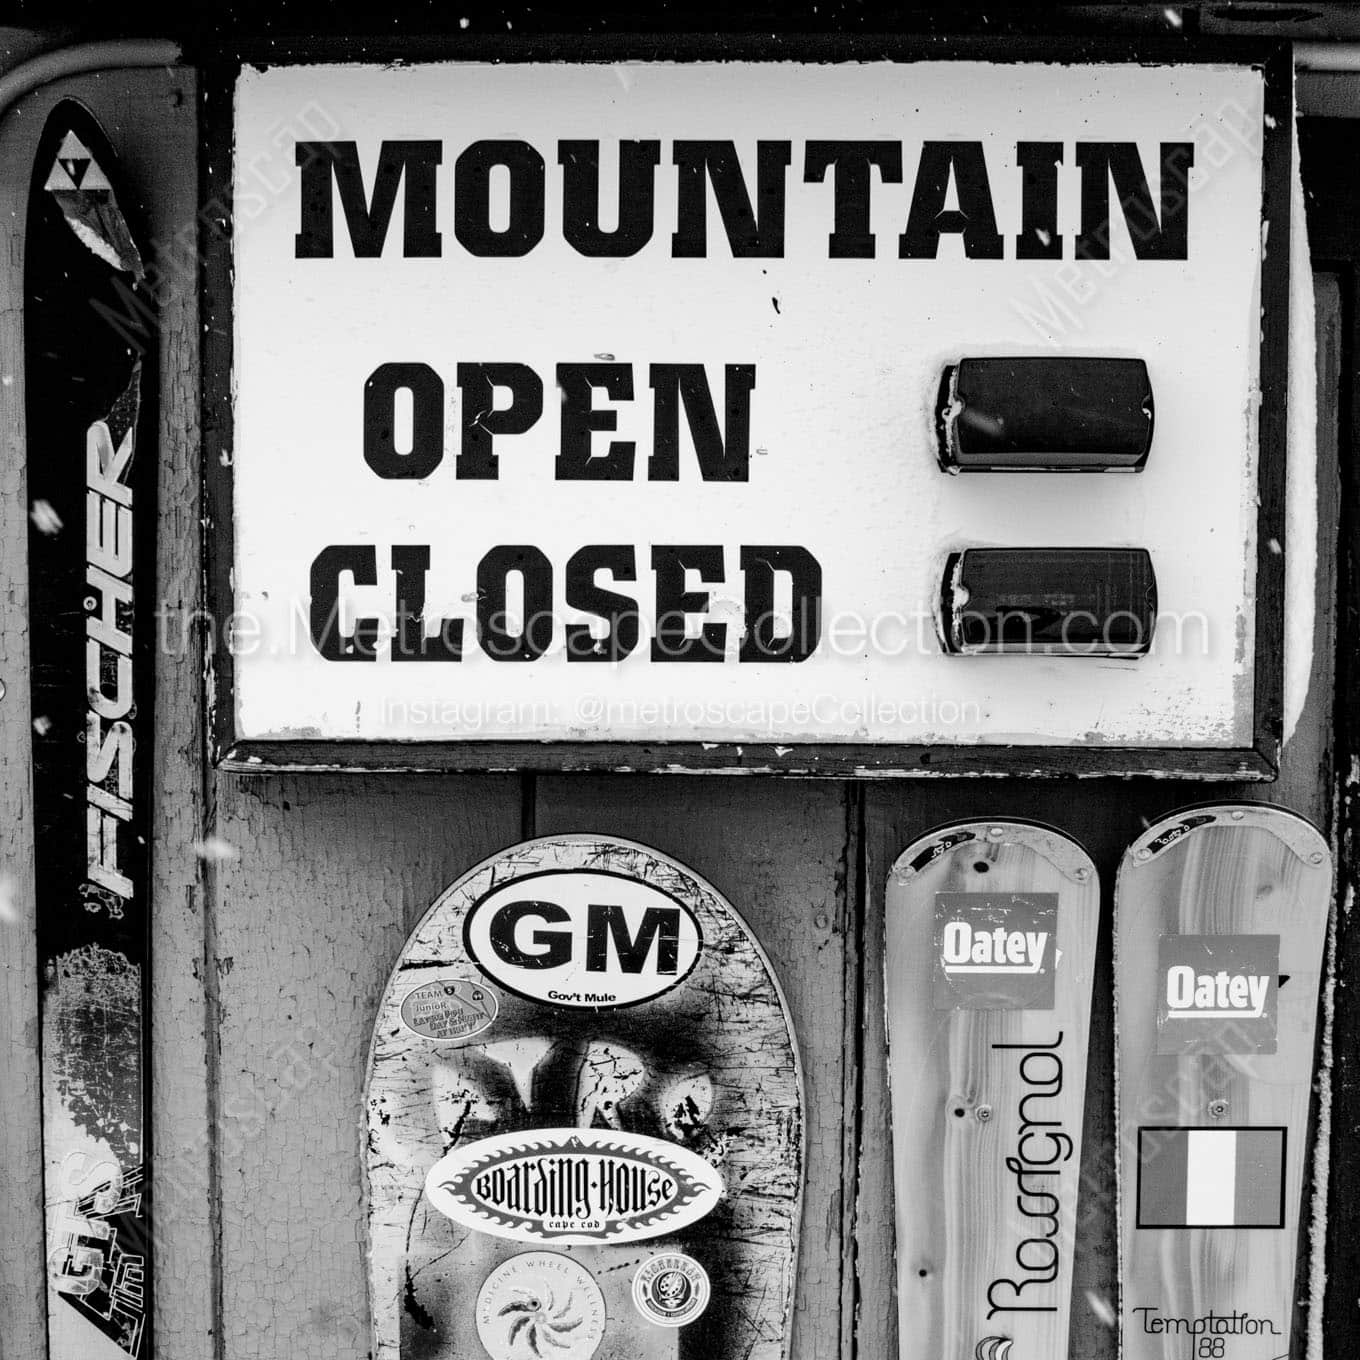 rendezvous mountain open closed sign Black & White Office Art